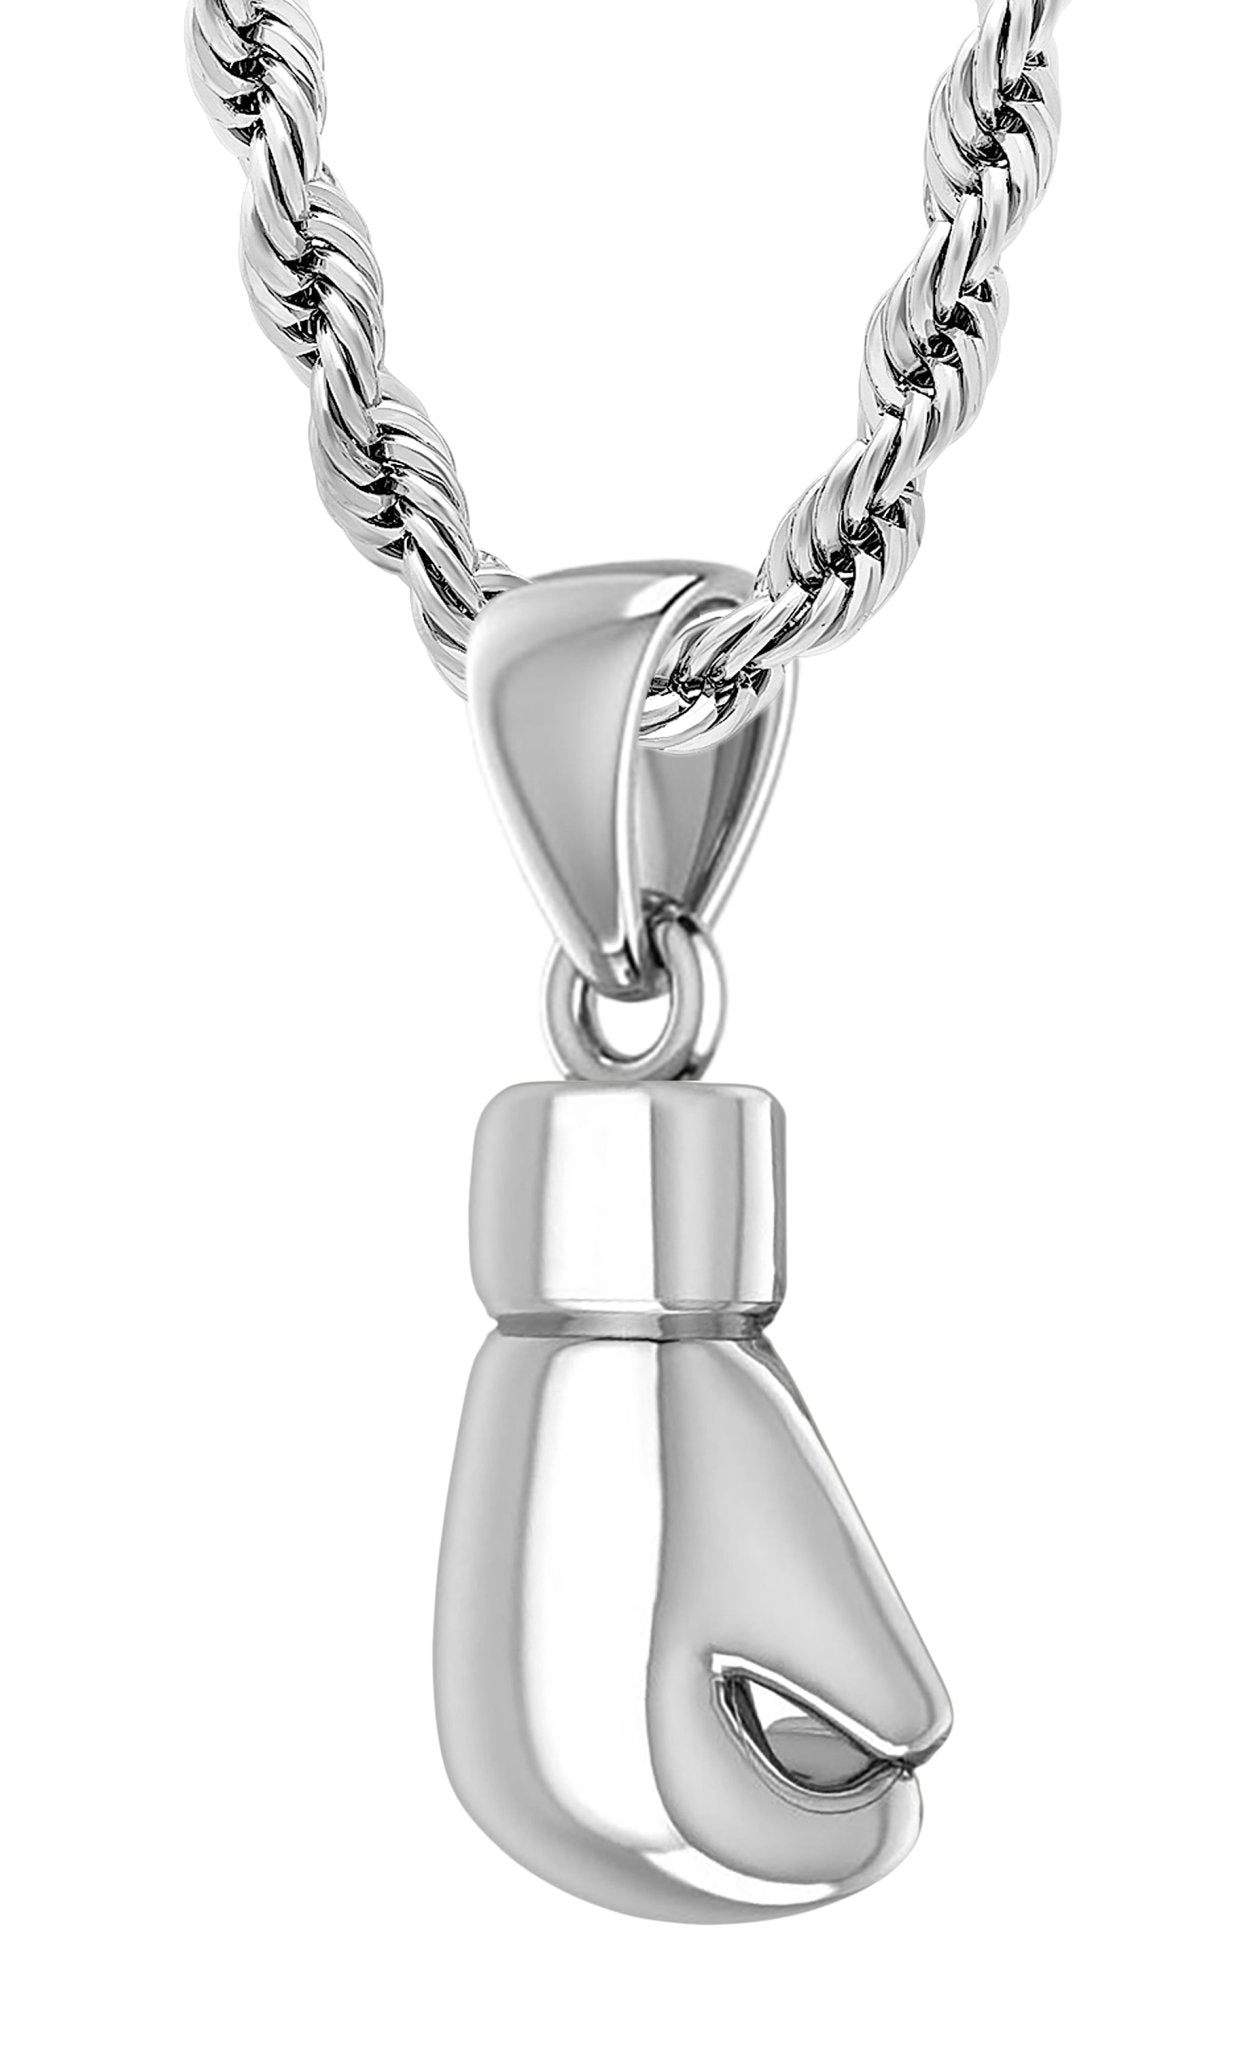 32mm 3D 925 Sterling Silver Boxing Glove Pendant Necklace, 22g - US Jewels